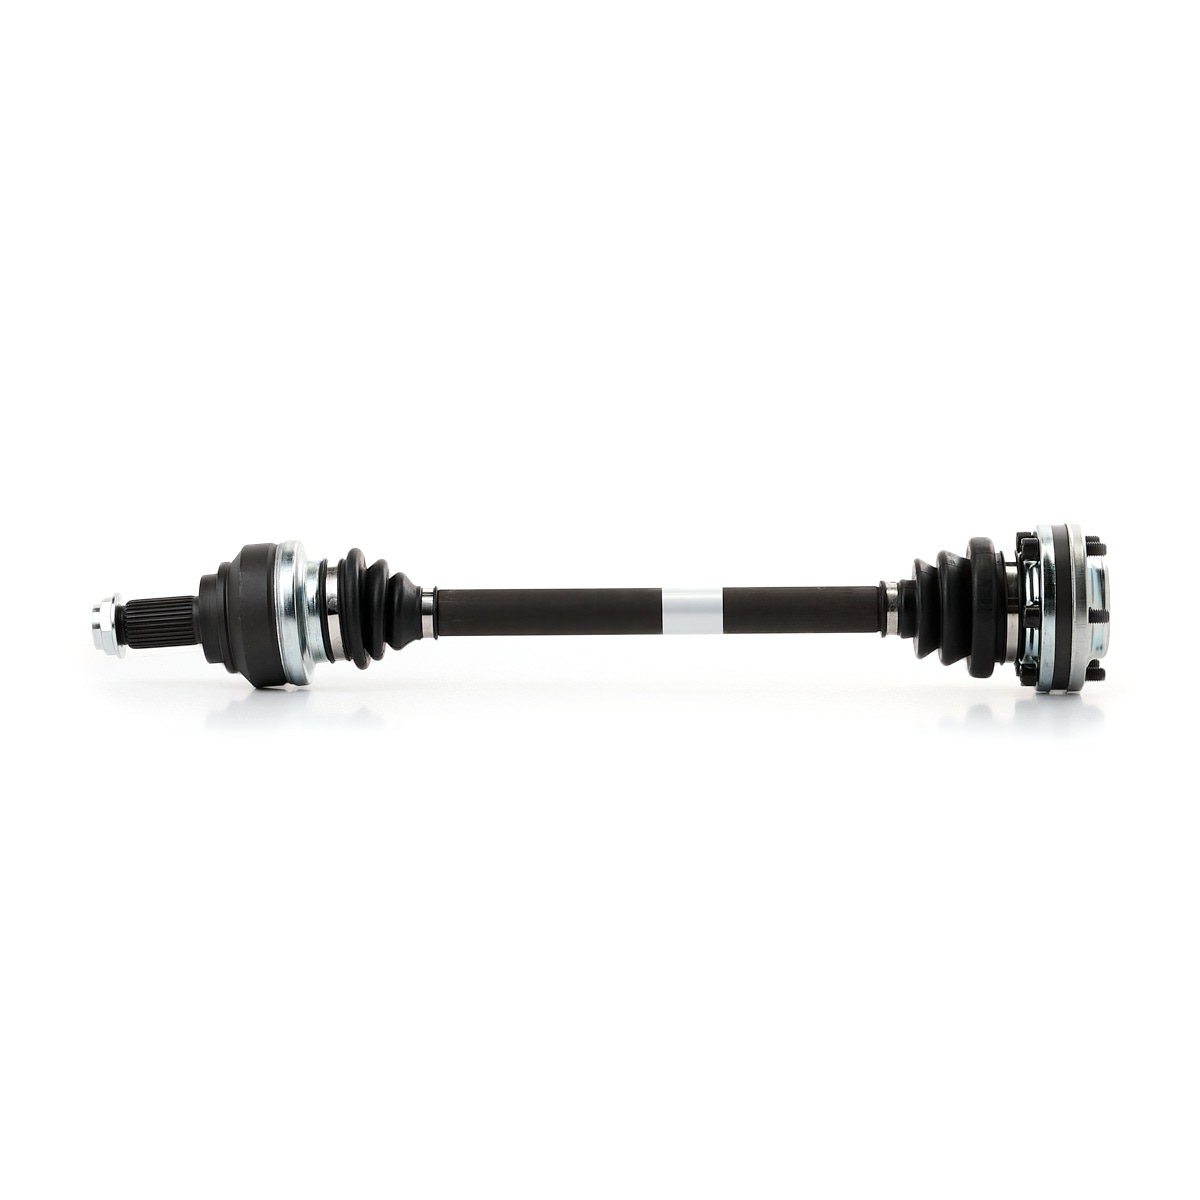 Buy Drive shaft SKF VKJC 8675 - Drive shaft and cv joint parts BMW 5 Series online